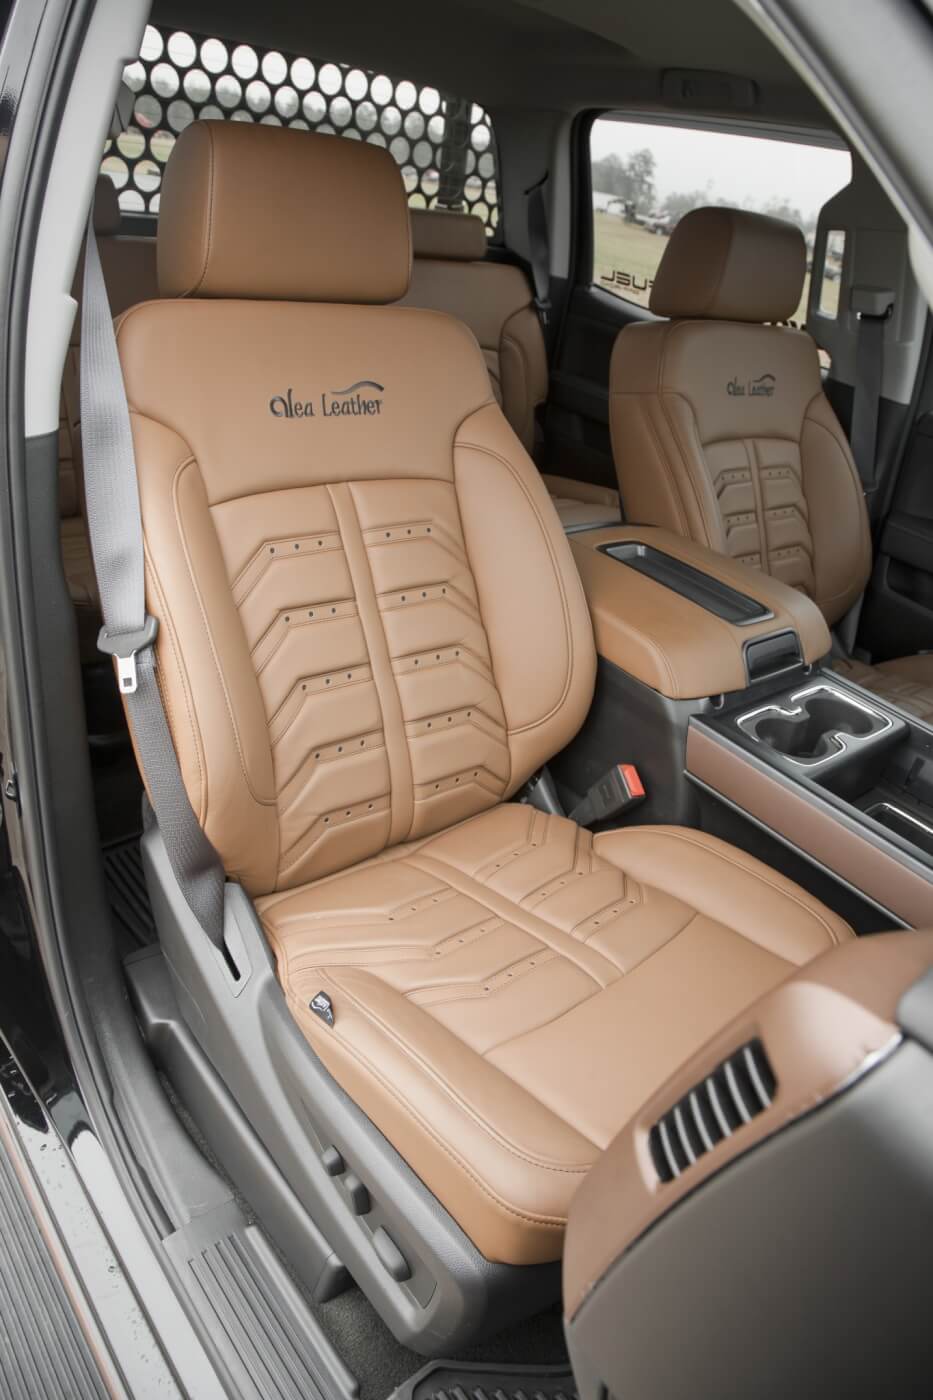 The interior is mostly stock, with the stock seats being recovered with Amaretto-colored Napa grain leather covers from Alea Leather. The sound system was also upgraded with Kicker speakers tied into the factory touchscreen head unit.